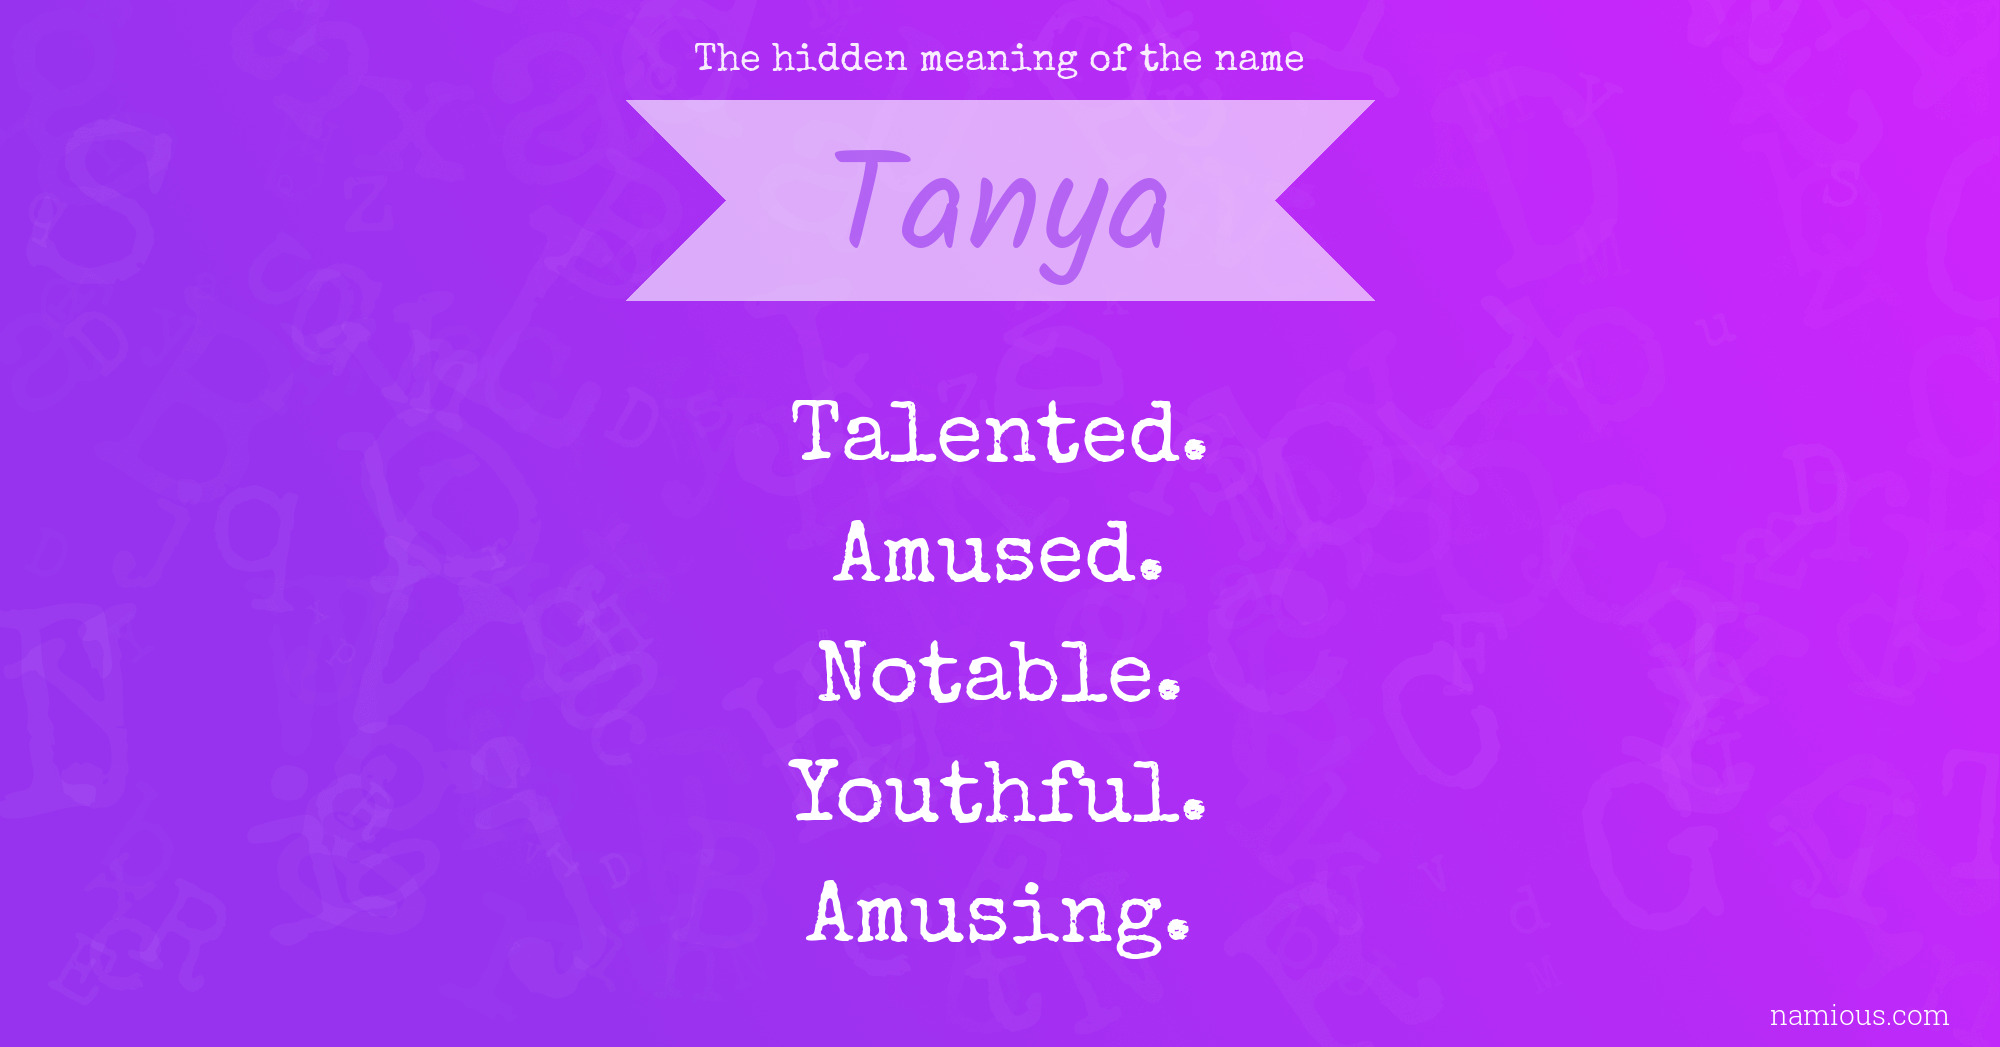 The hidden meaning of the name Tanya